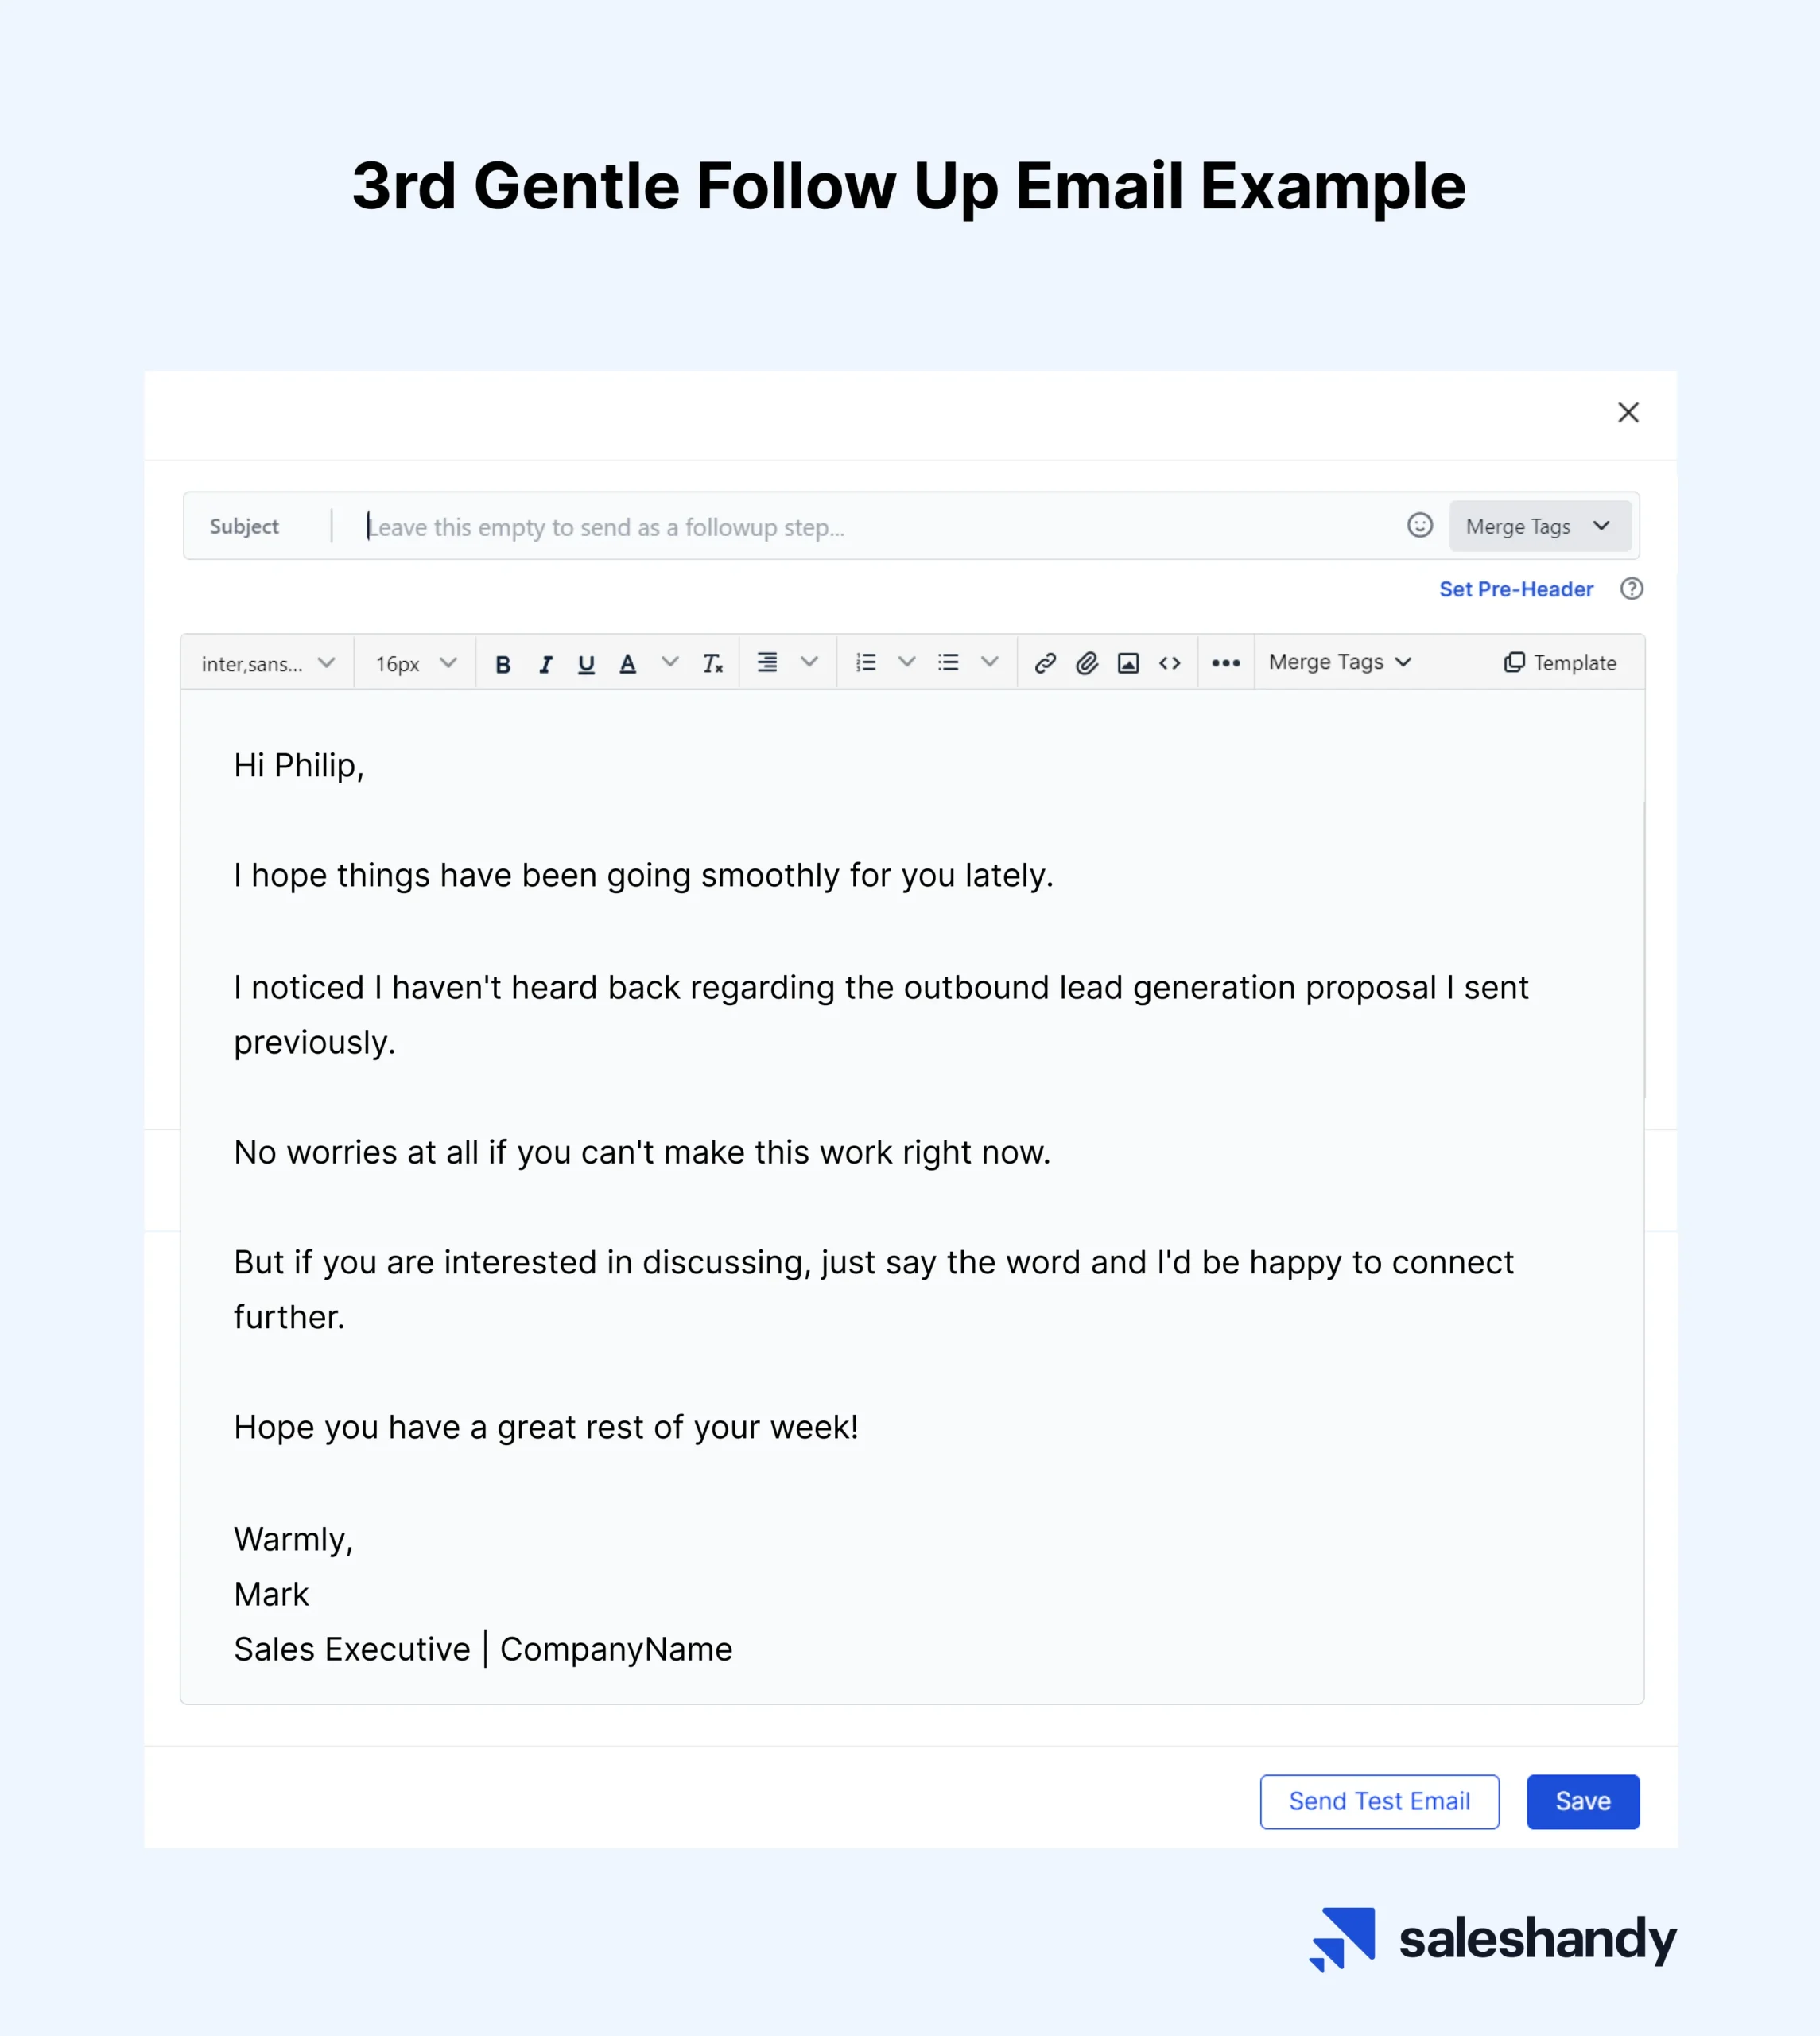 3rd Gentle Follow Up Email Example